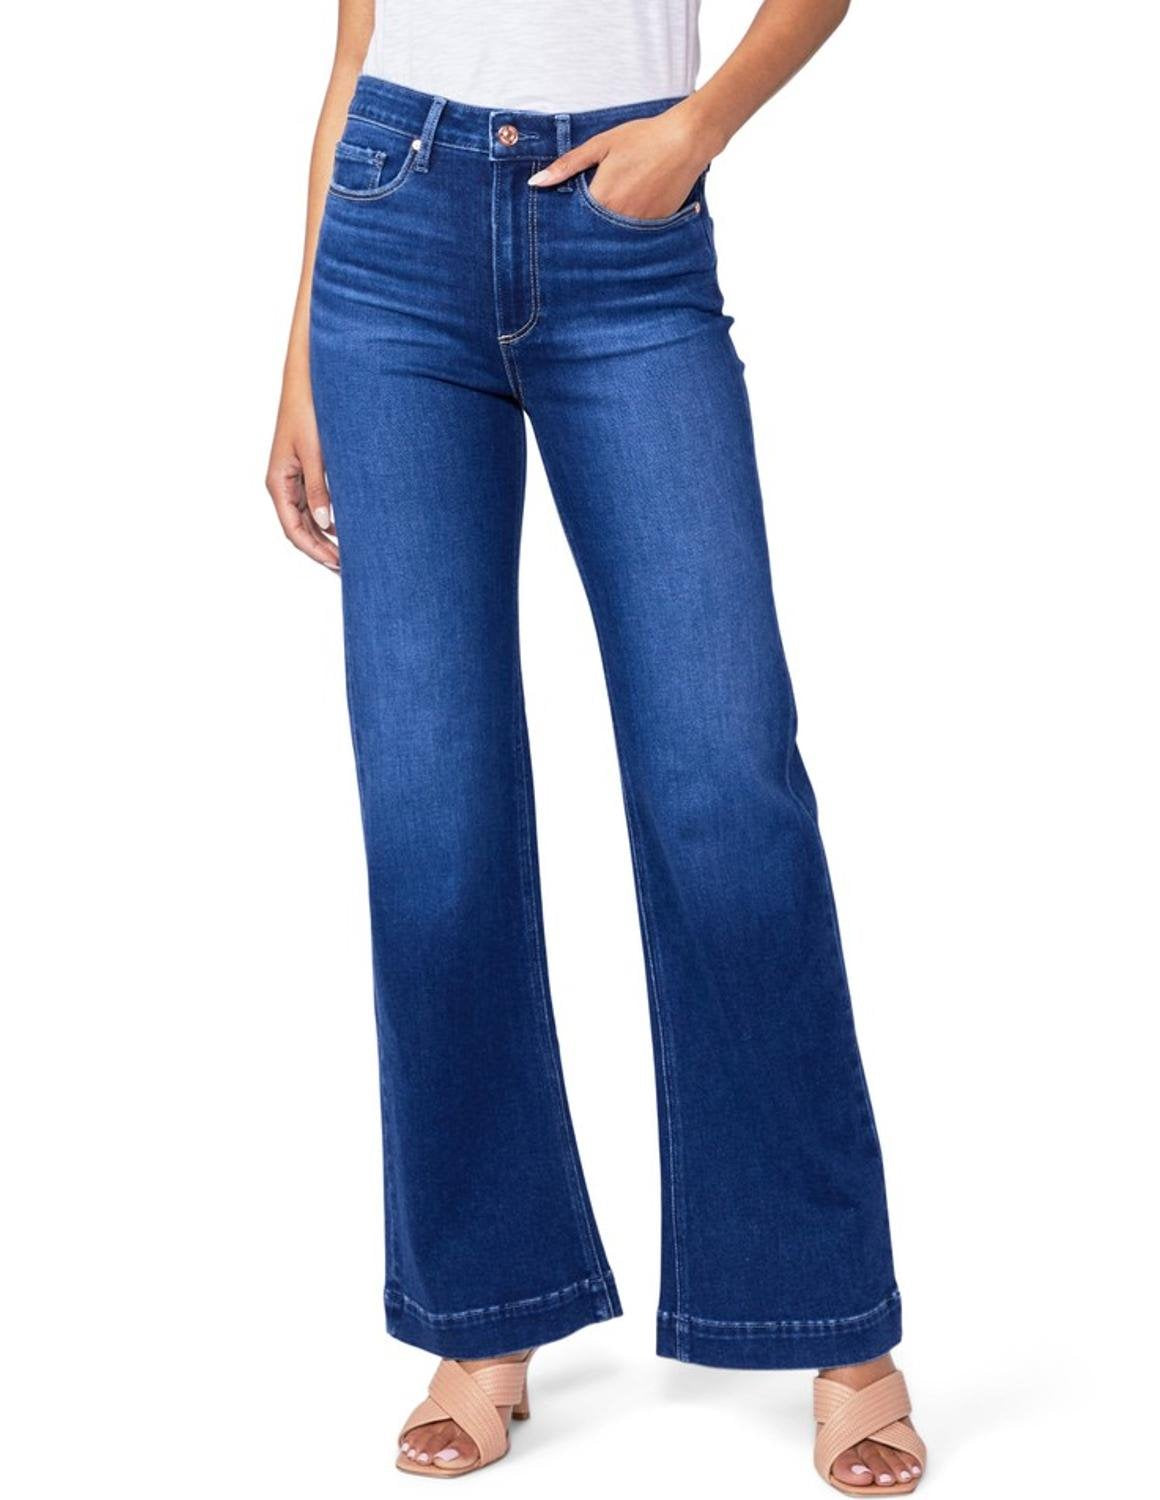 Mid blue wash straight / wide leg 32 inch leg jeans with zip fly and button fastening